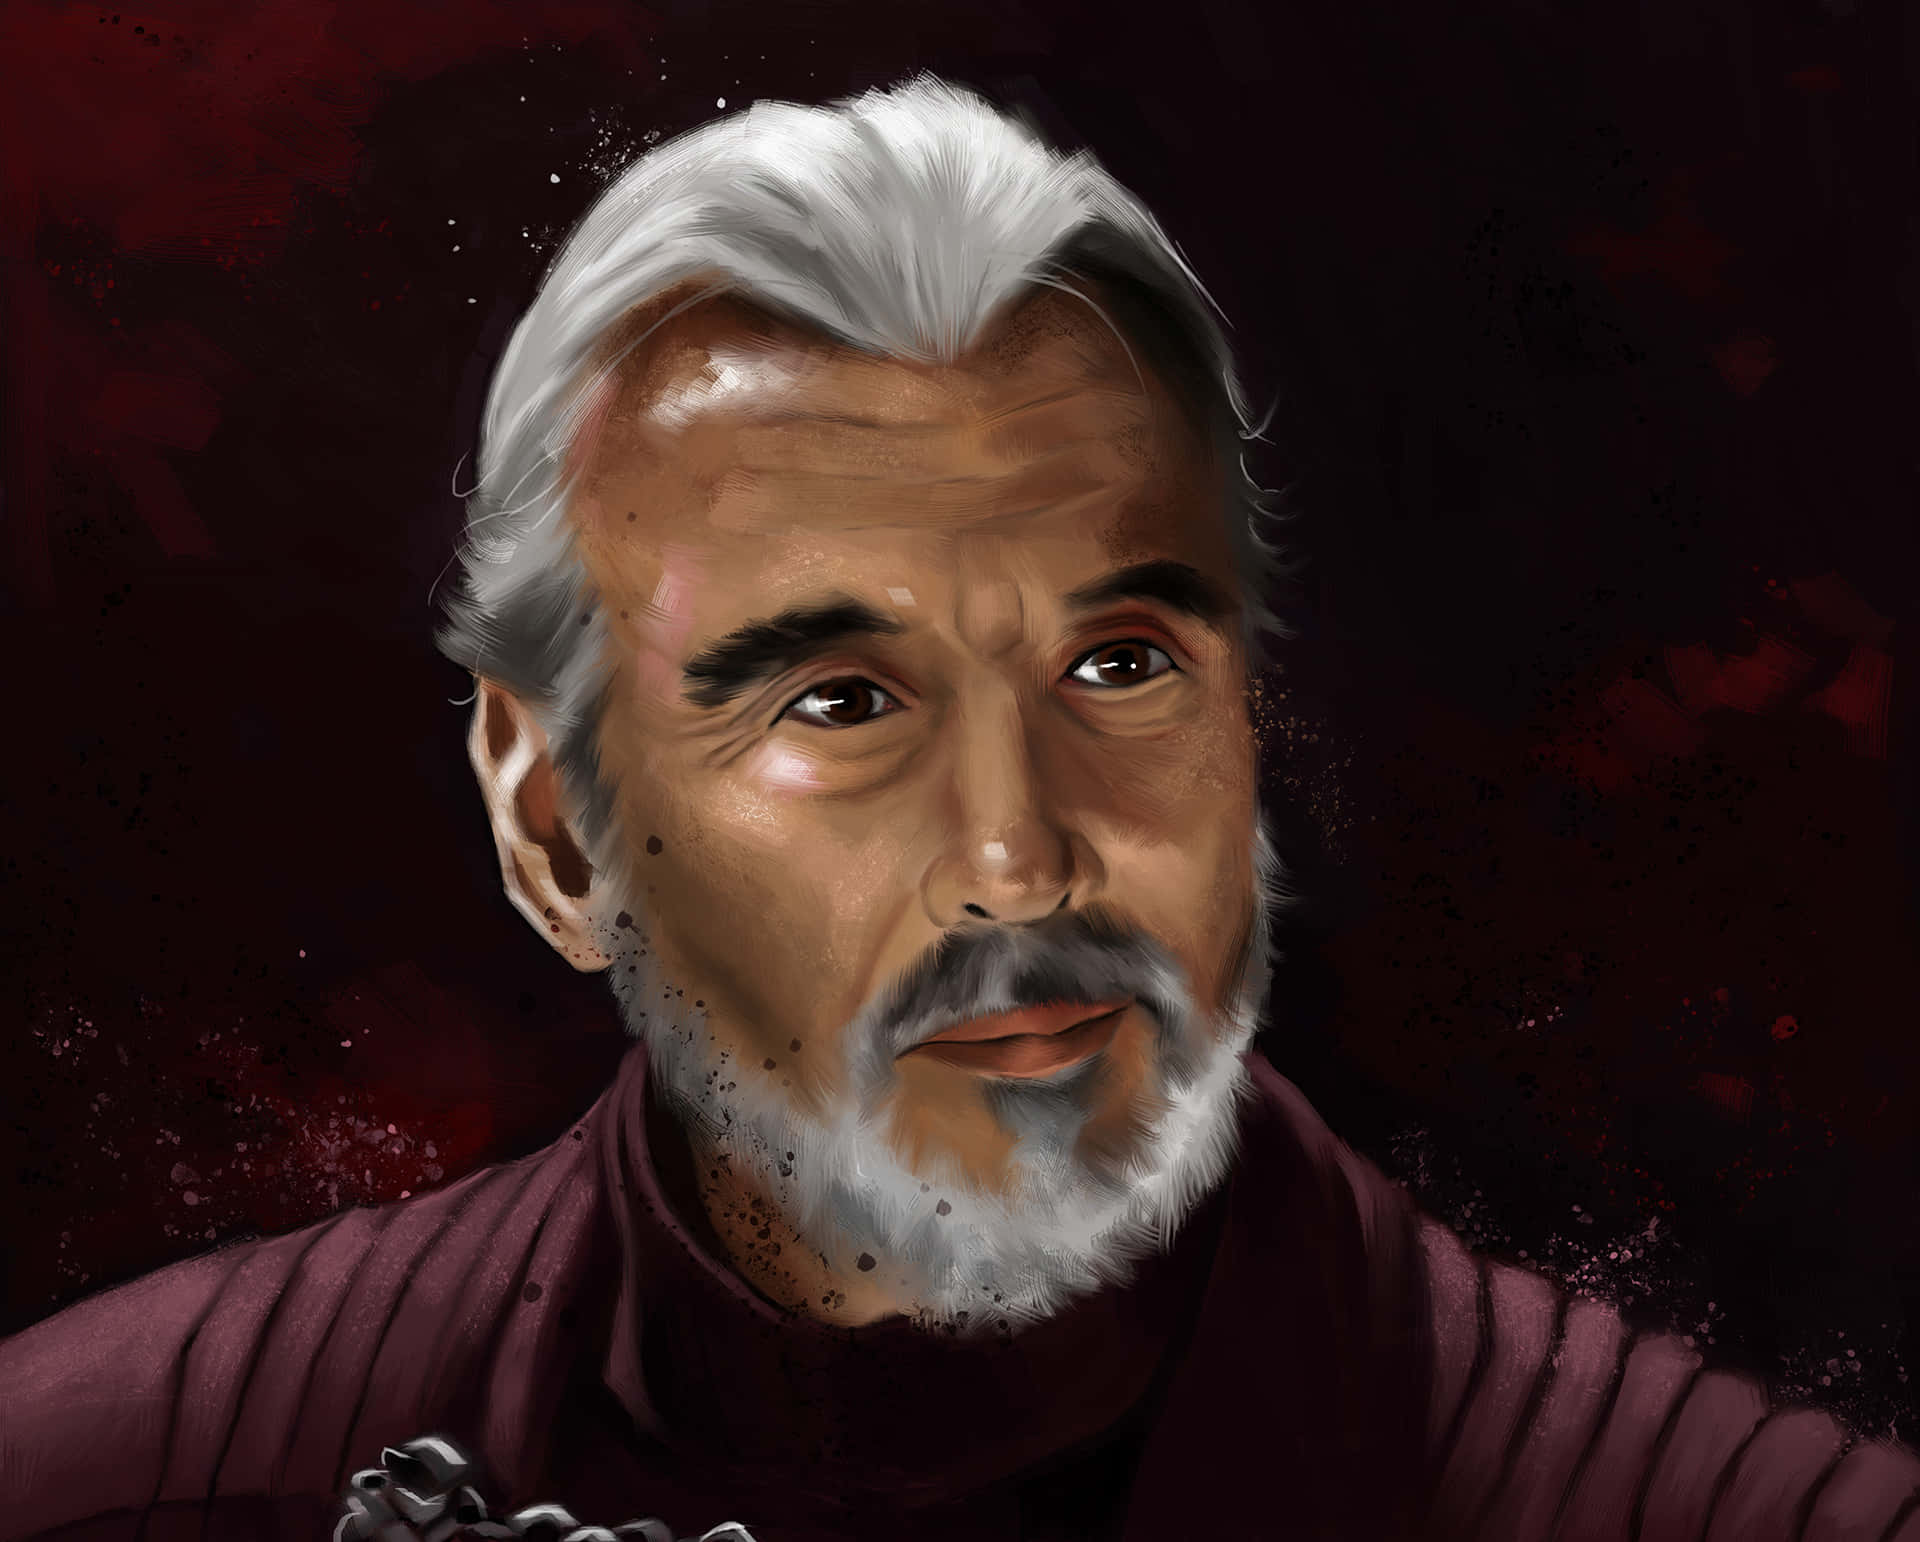 Count Dooku in a powerful stance amidst a darkened setting Wallpaper